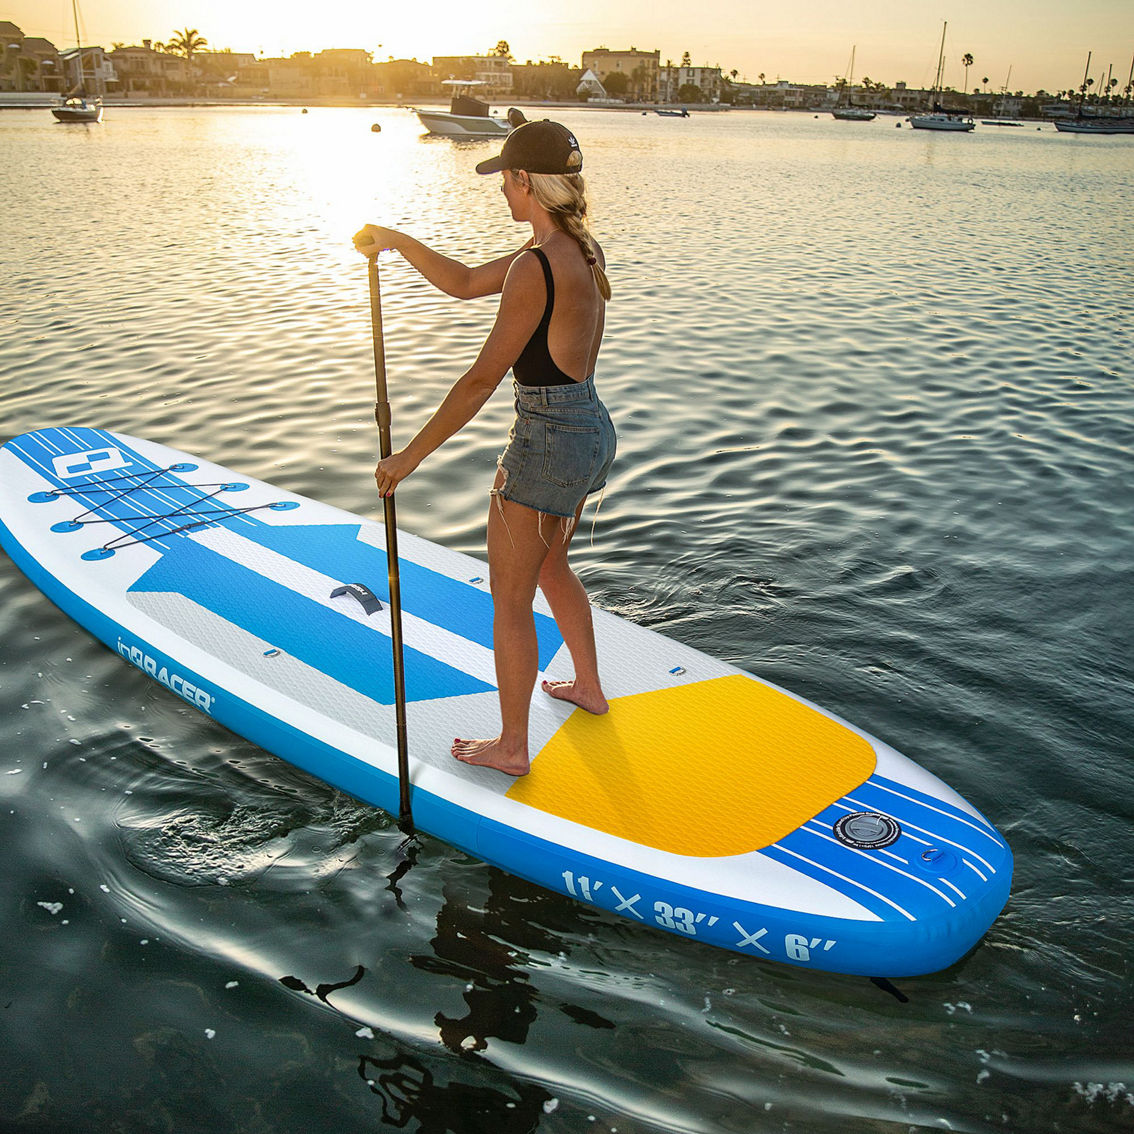 inQracer Inflatable Stand Up Paddle Board 11'x33''x6'', Blue - Image 4 of 5